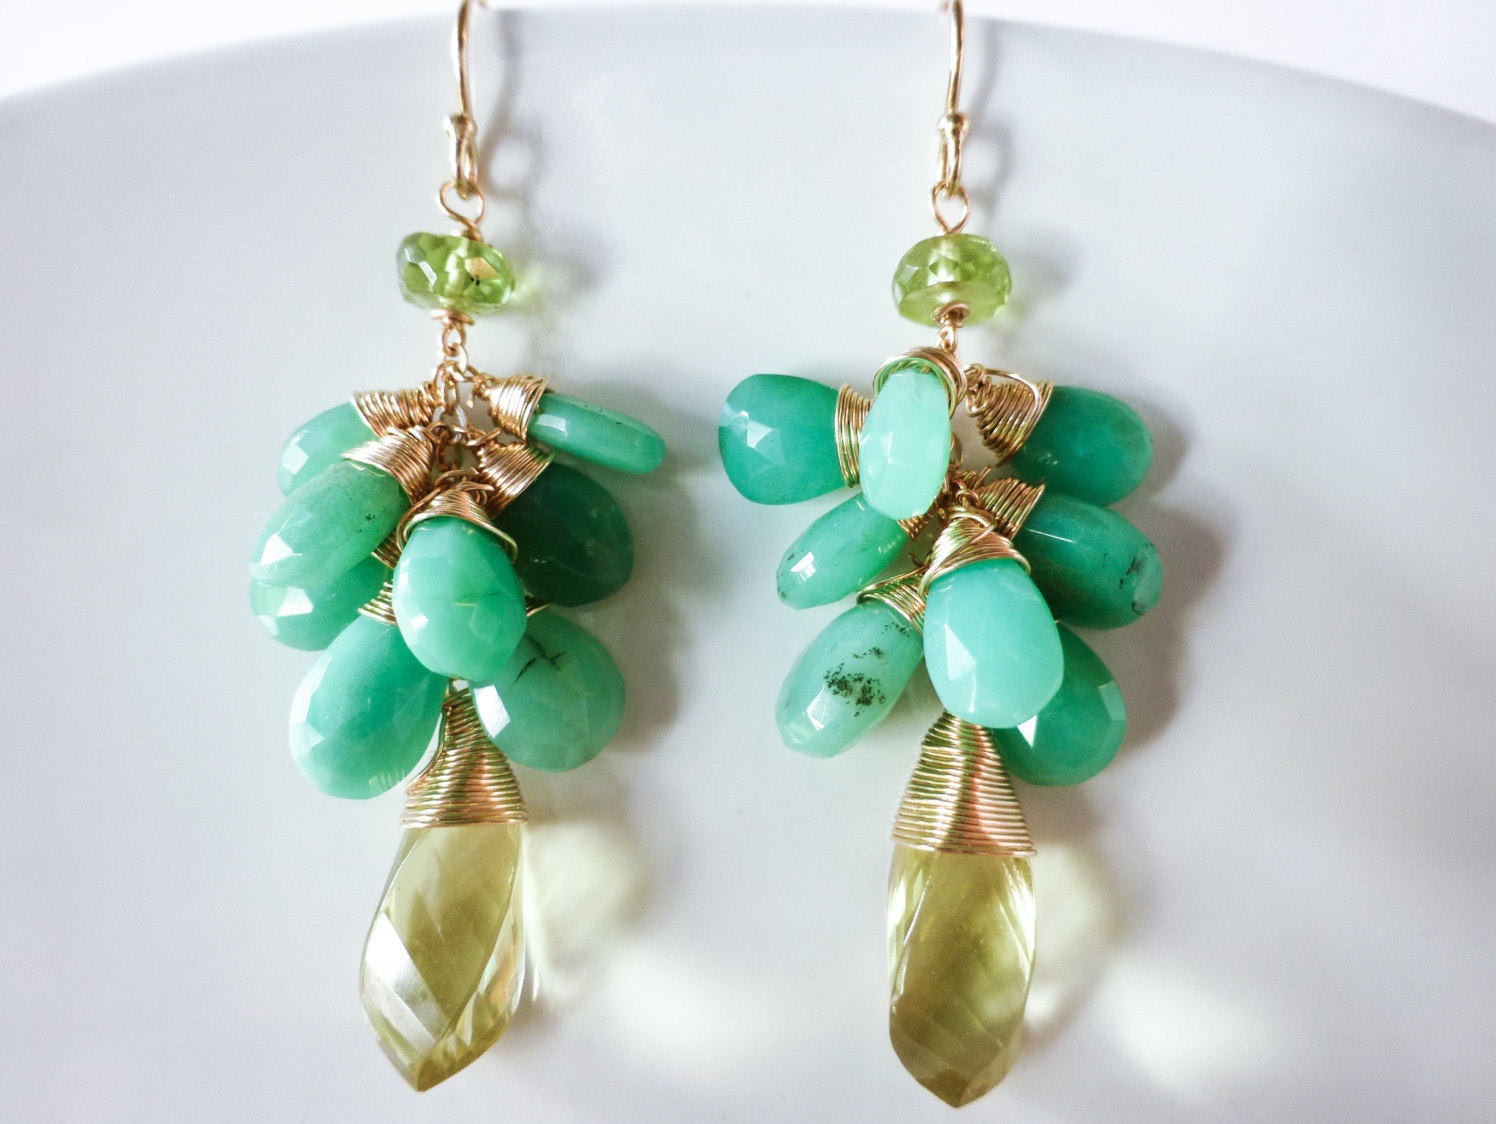 Green Chrysoprase Cluster Earrings with Lemon Quartz briolettes Wire Wrapped in Gold Filled